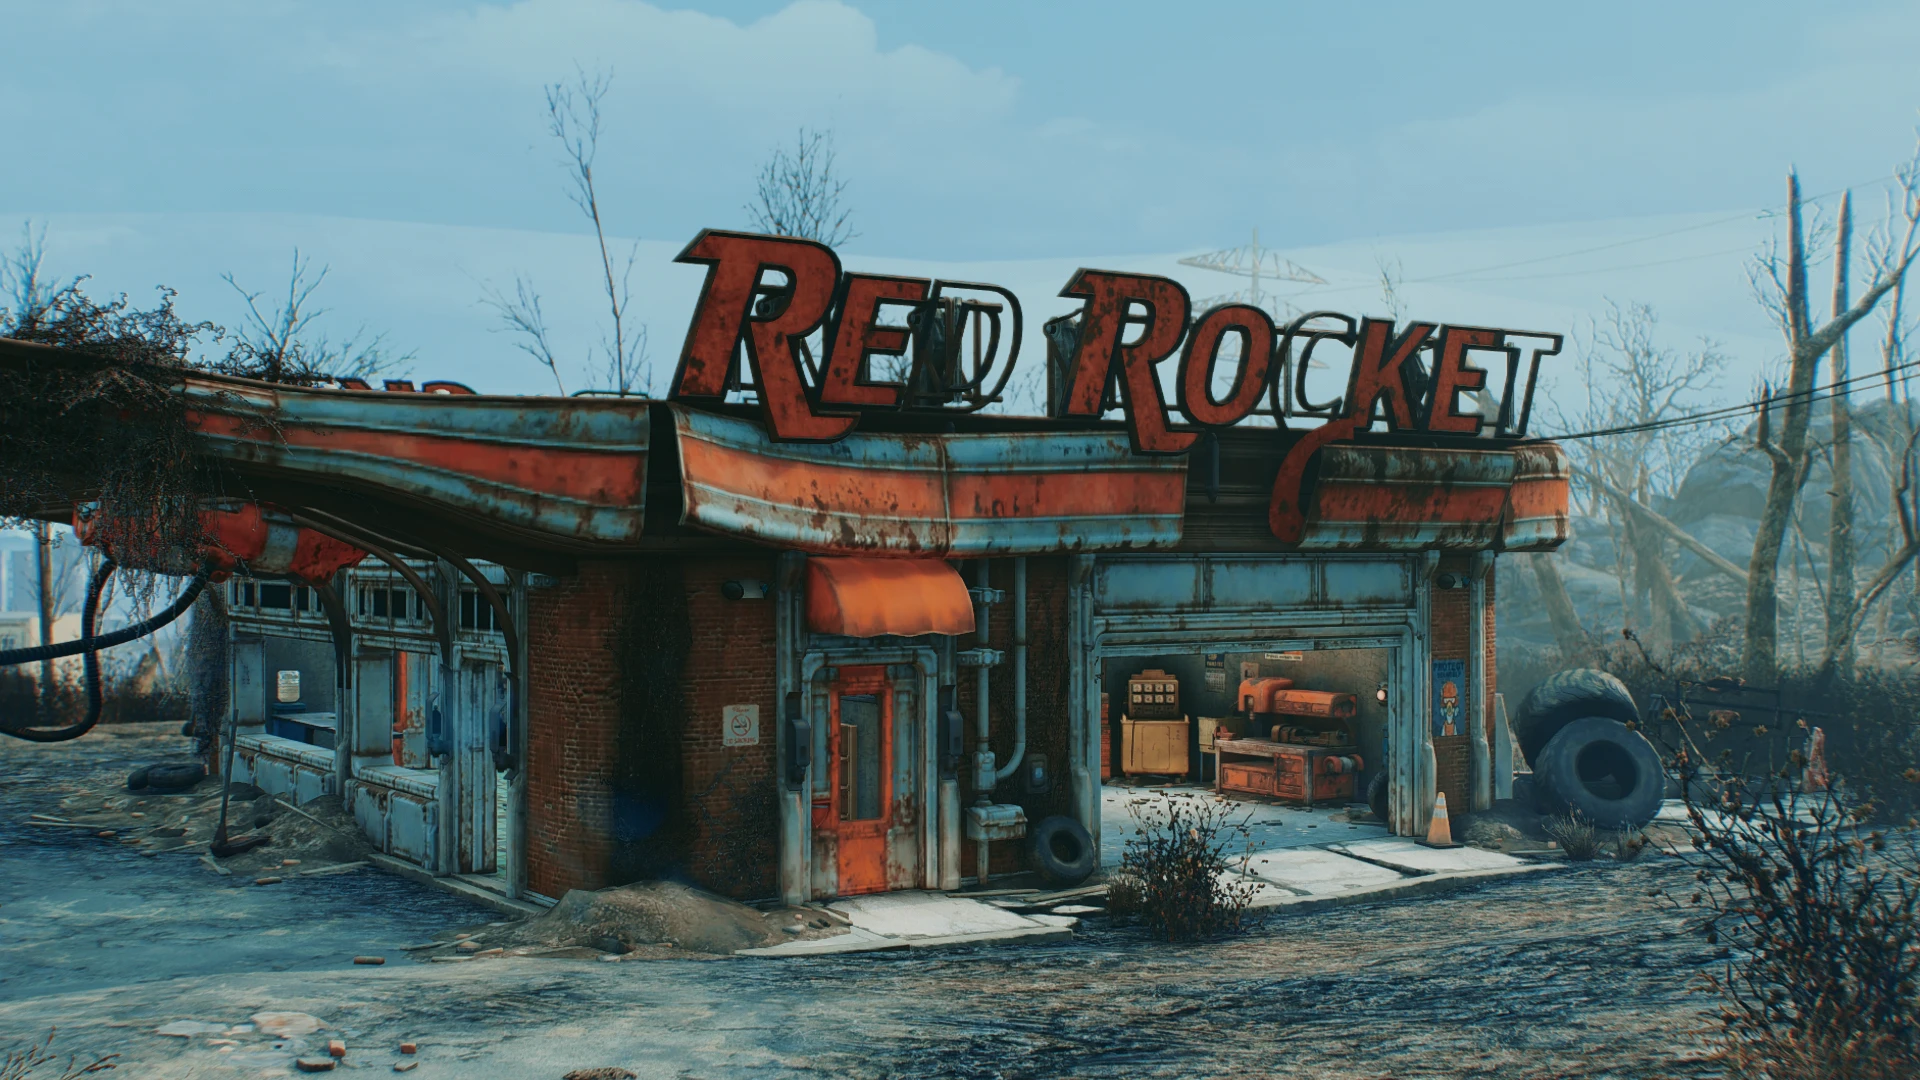 Home Sweet Red Rocket.